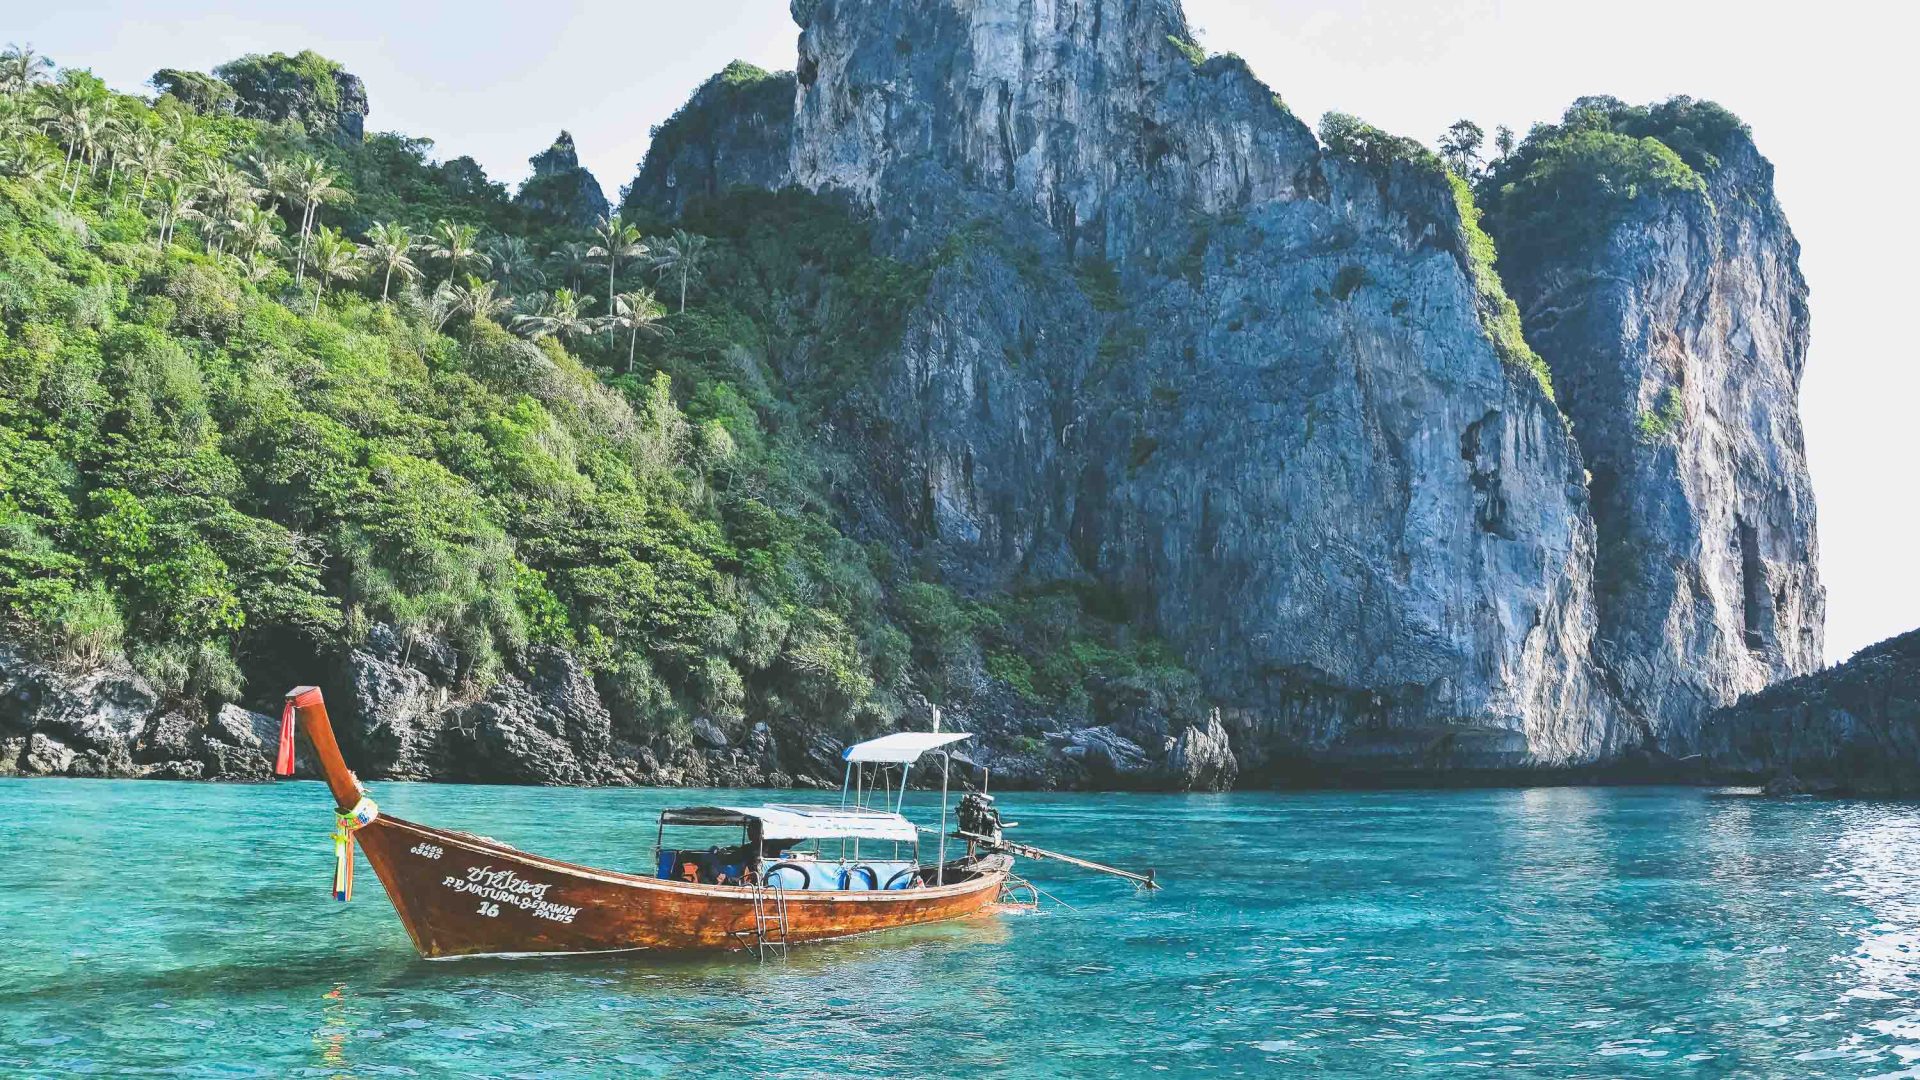 A boat in turquoise water.